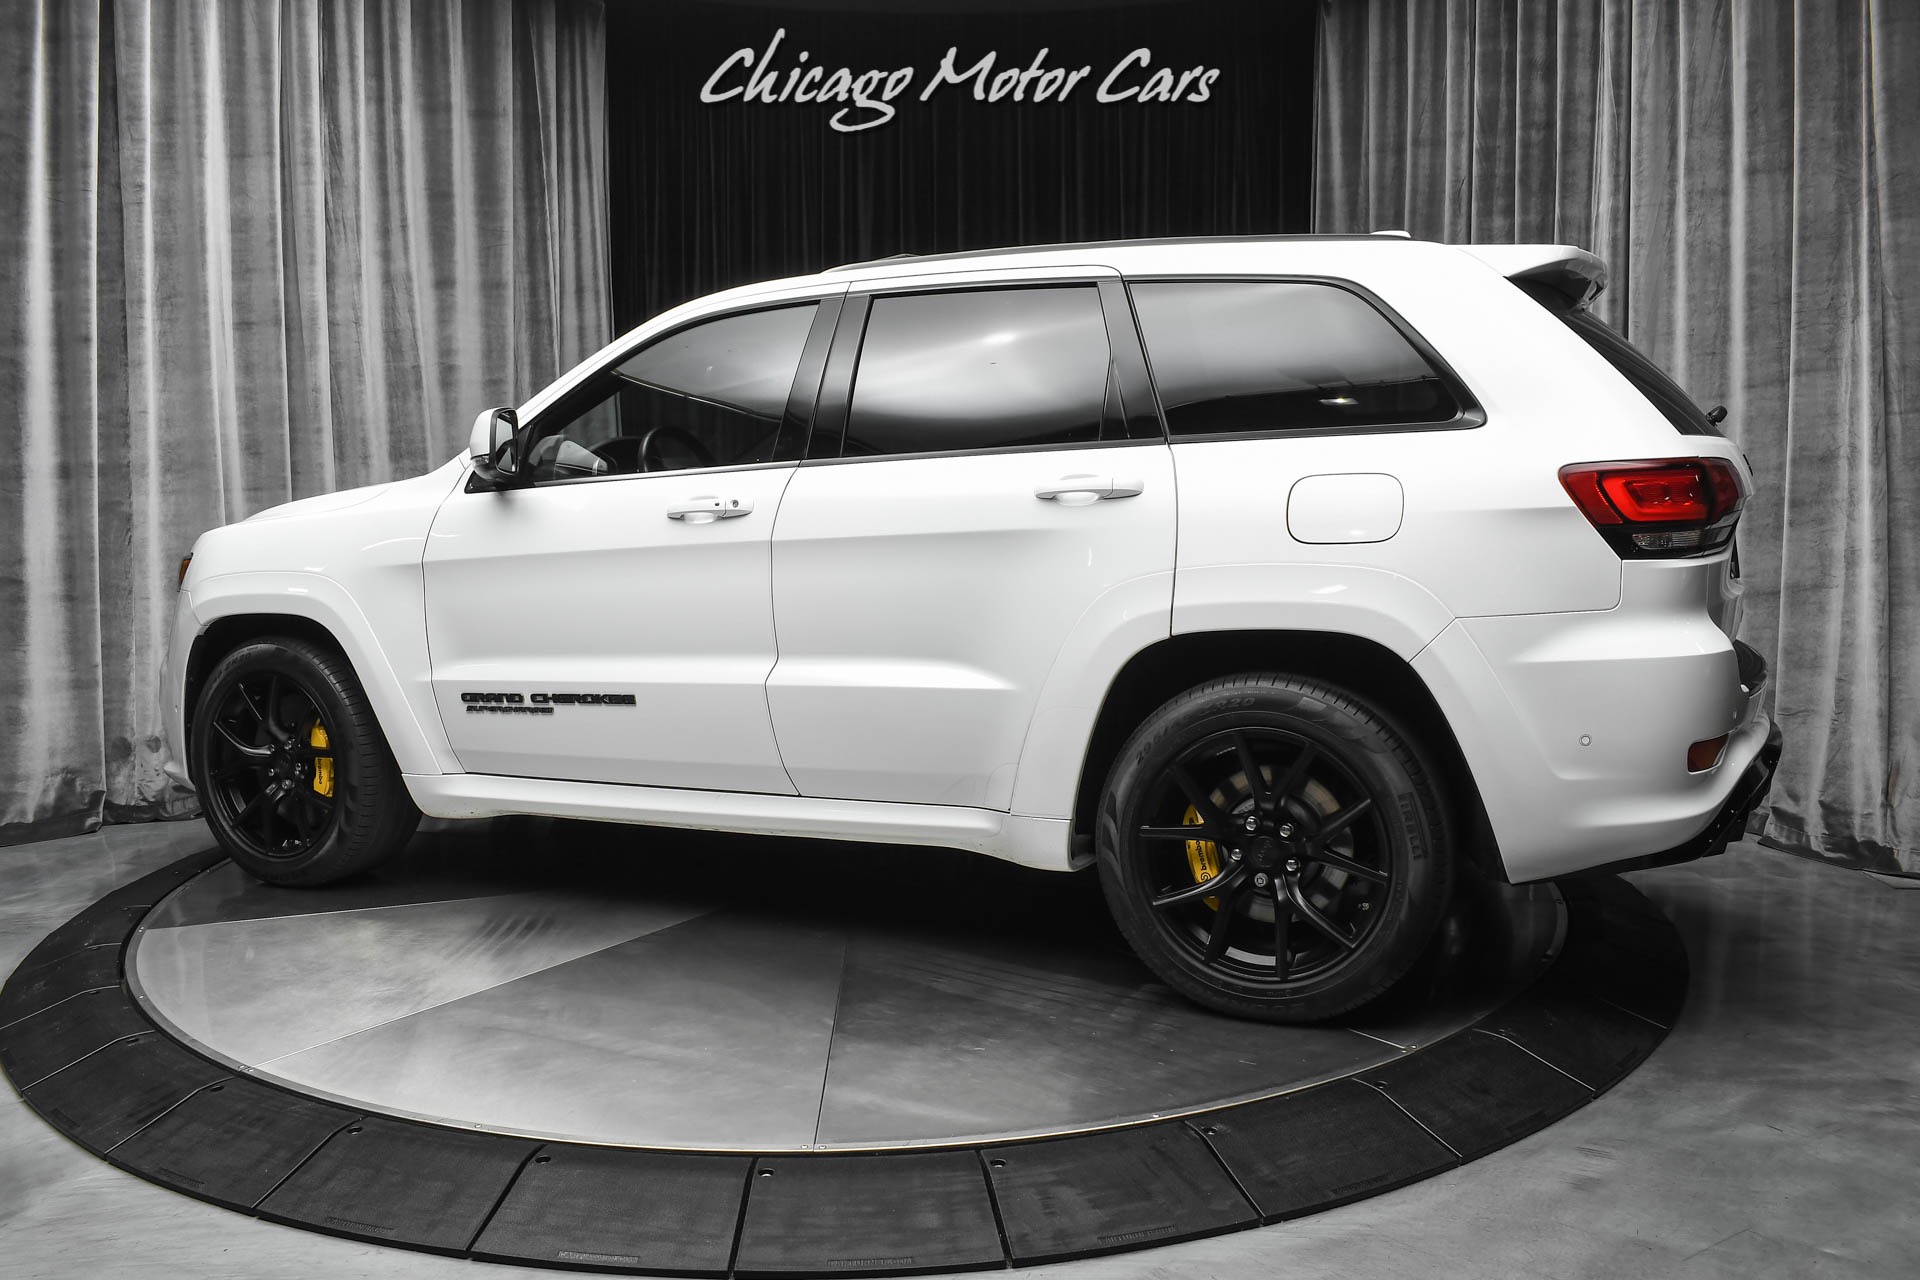 Used-2018-Jeep-Grand-Cherokee-Trackhawk-98kMSRP-Signature-Leather-Package-Pano-Sunroof